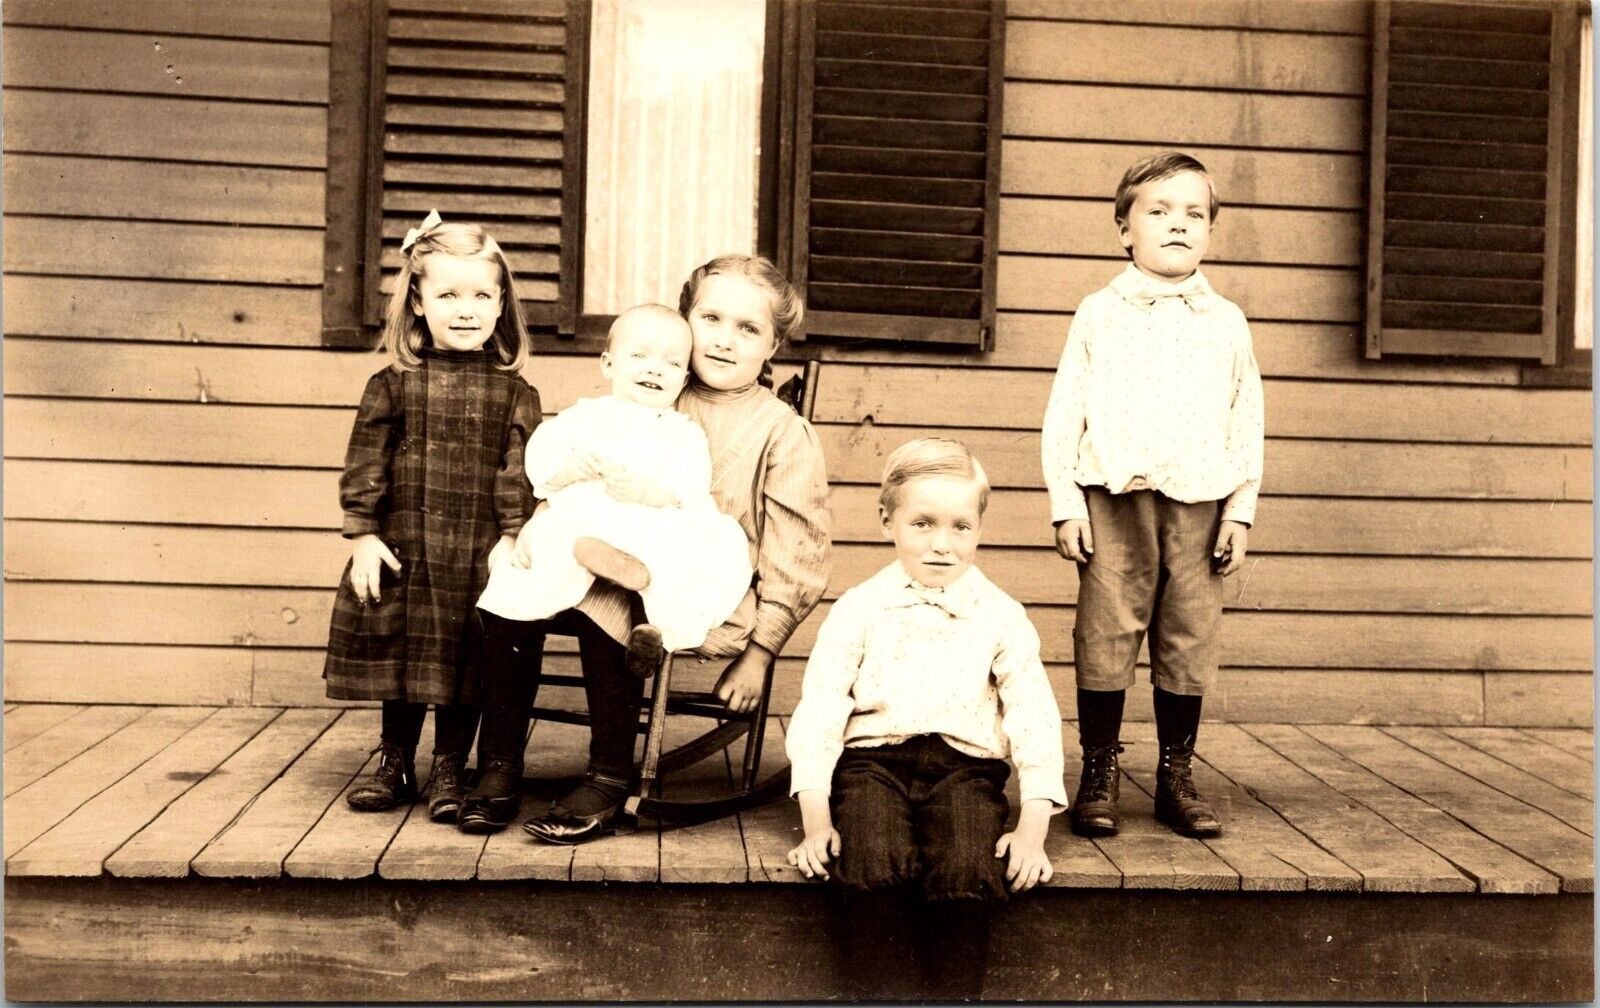 PORTRAIT OF FIVE ADORABLE SIBLINGS ON A FRONT PORCH  : CYKO : RPPC   1911